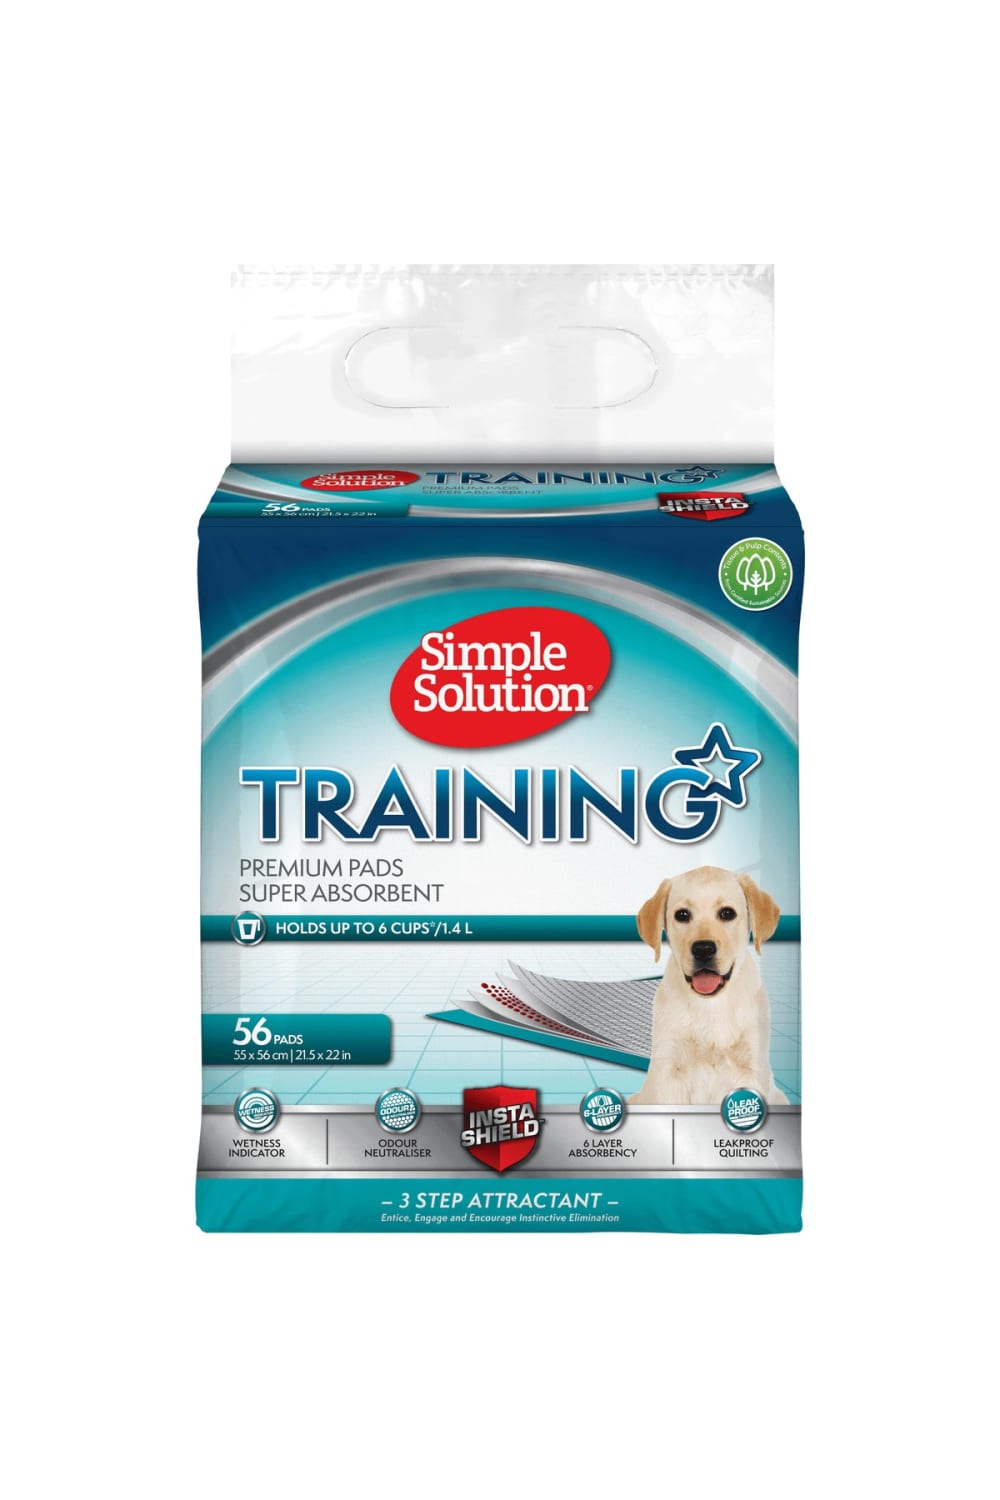 Simple Solution Premium Puppy Training Pads (Pack of 56) (Sky Blue) (One Size)